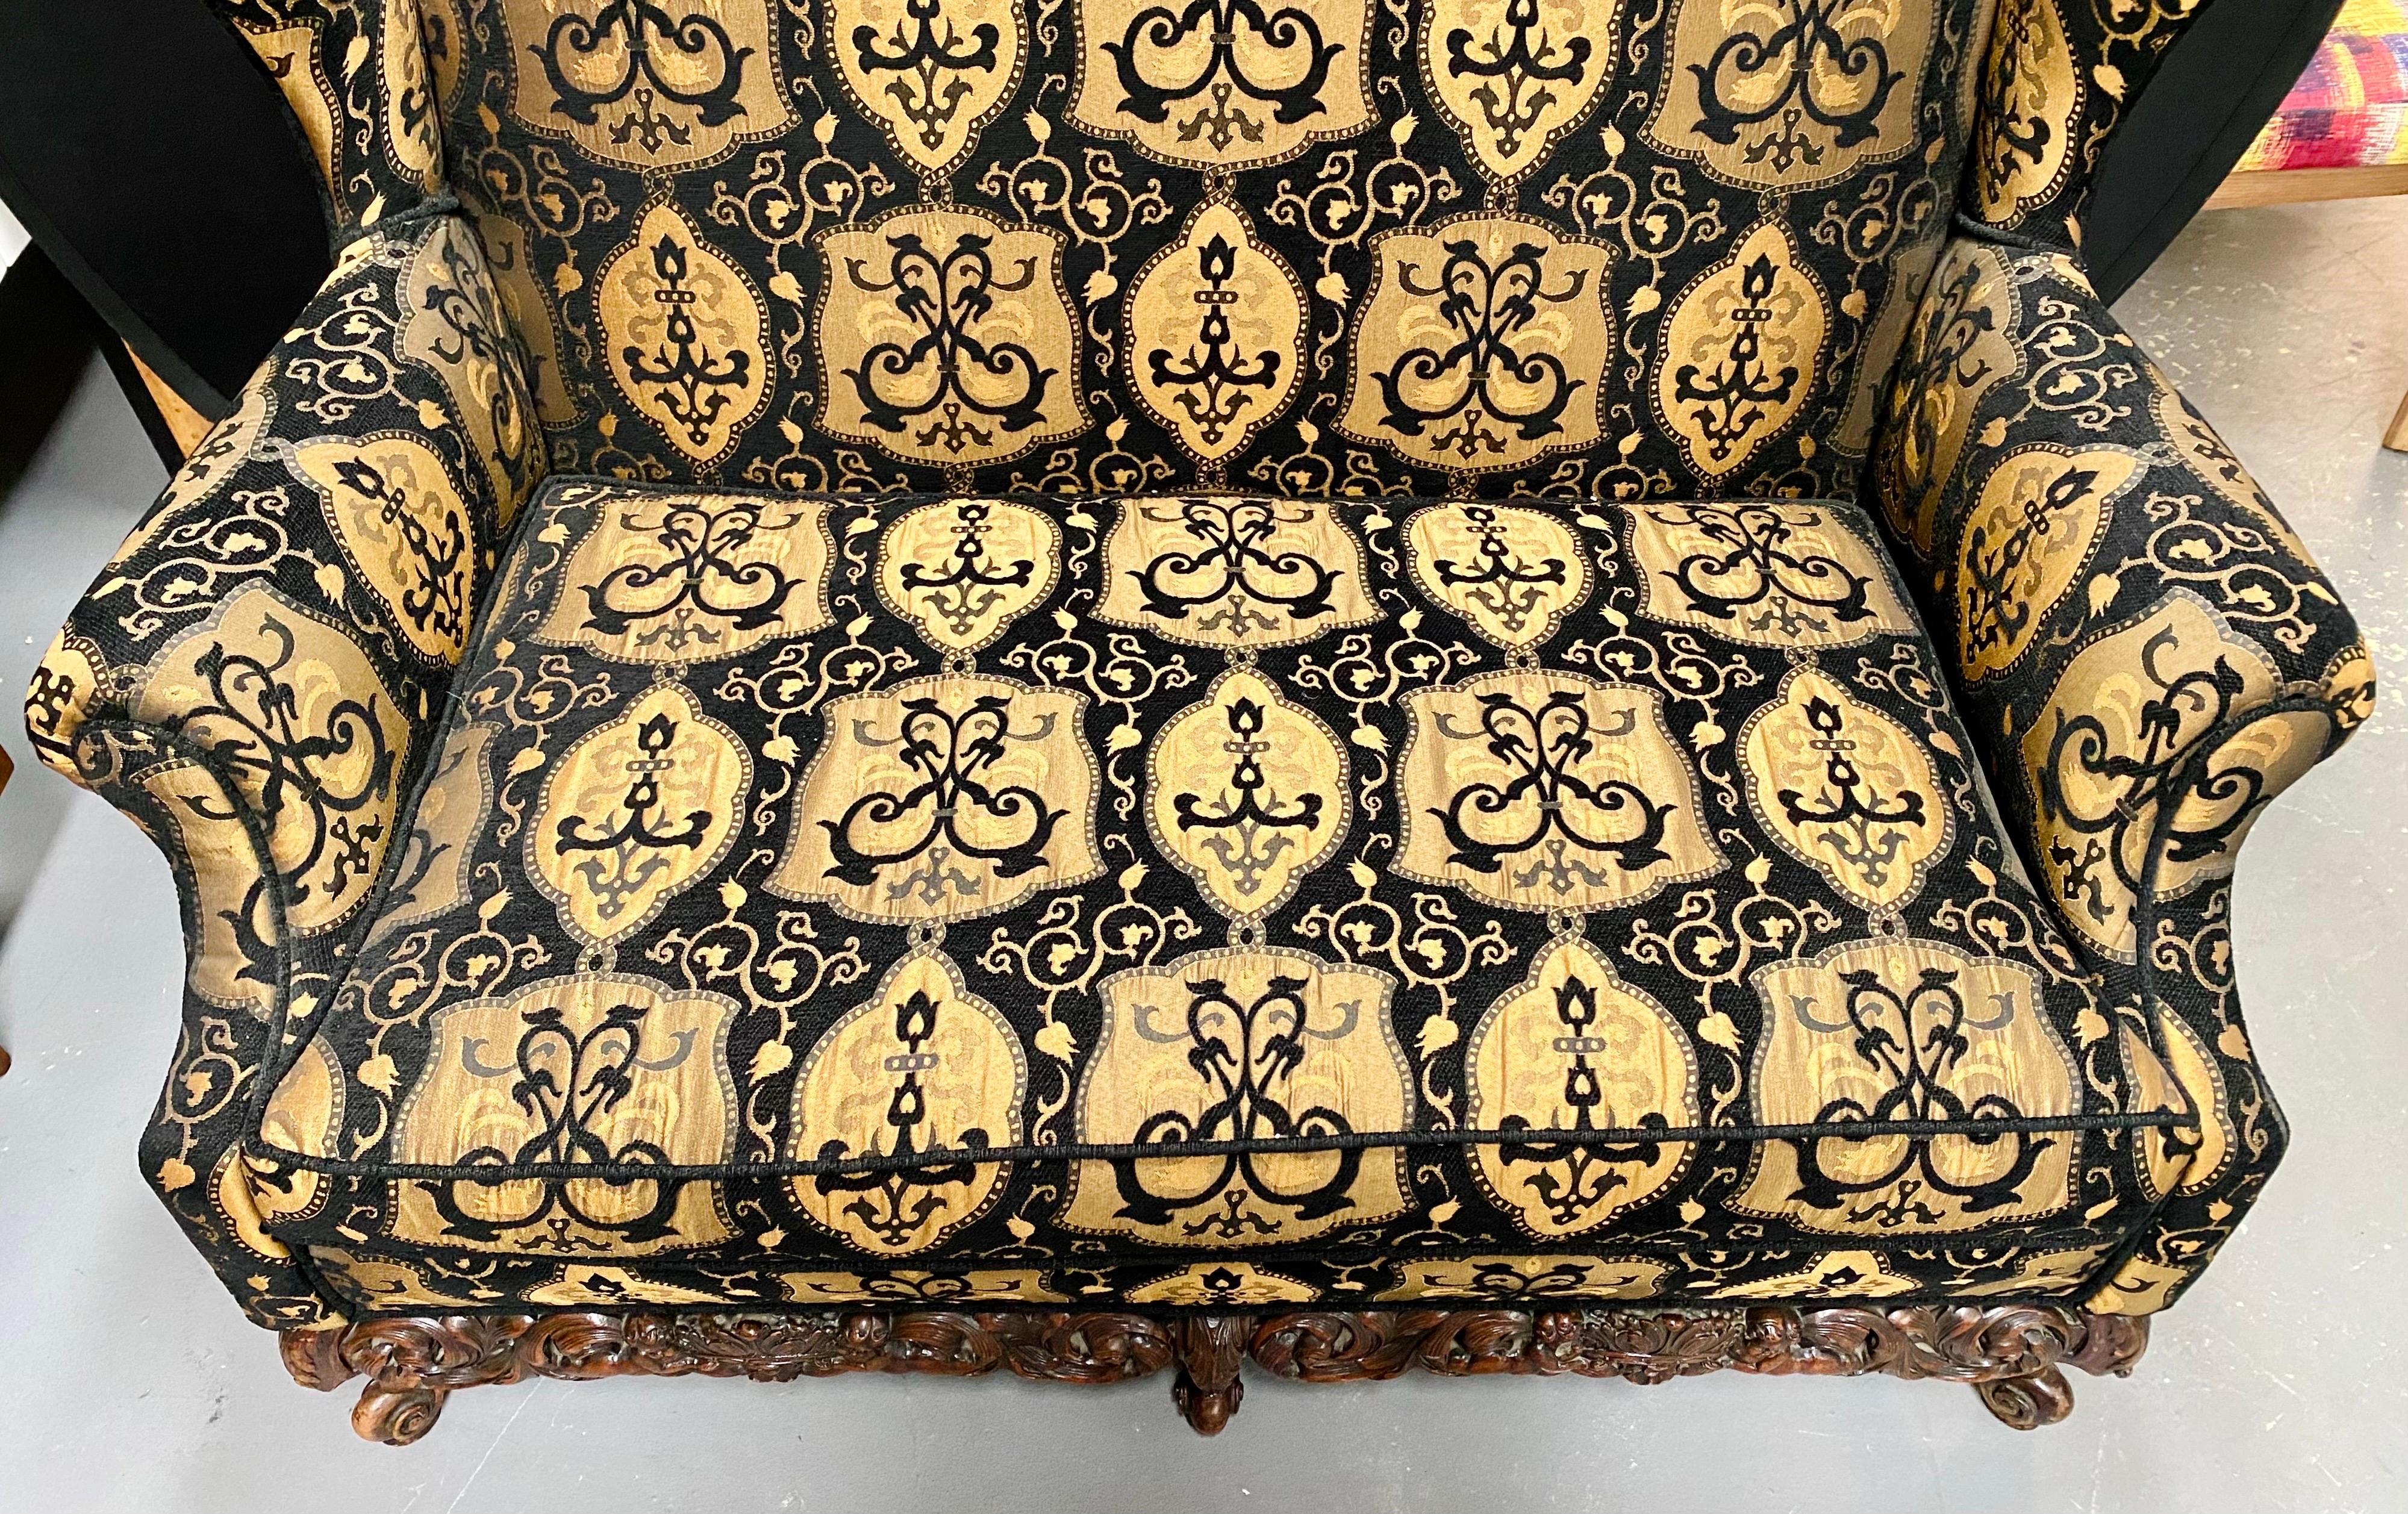 Italian Rococo Revival Style Settee or Sofa with Heraldic Motif in Black & Beige In Good Condition For Sale In Plainview, NY